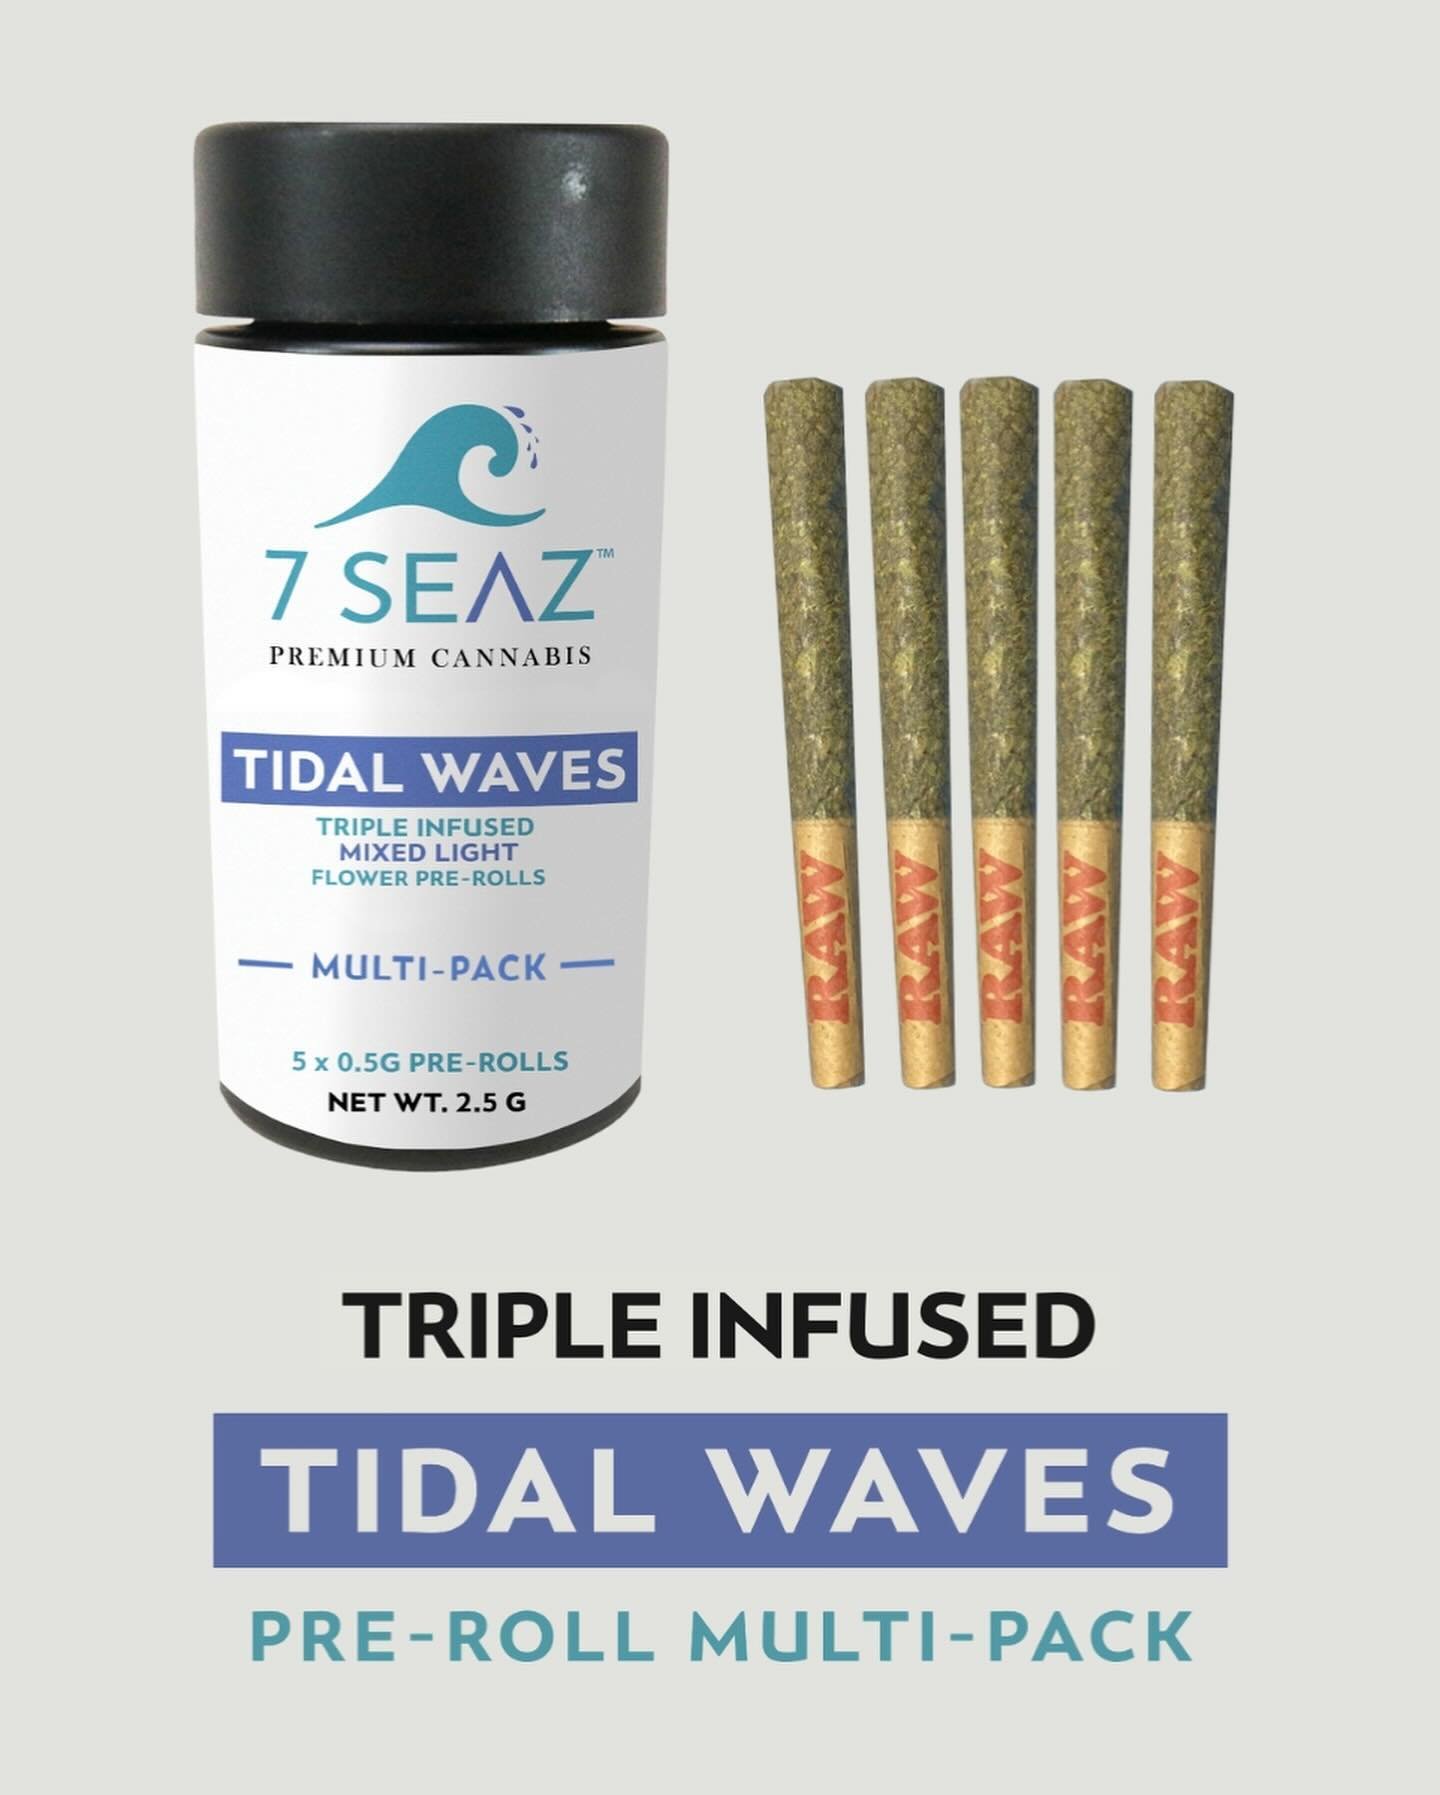 Announcing the newest member of the family 👀! 

&ldquo;Tidal Waves&rdquo; is our new multi-pack 2.5g triple infused option 🌊🌊🌊. 

SWIPE RIGHT ➡️ FOR FLAVOR ✈️.